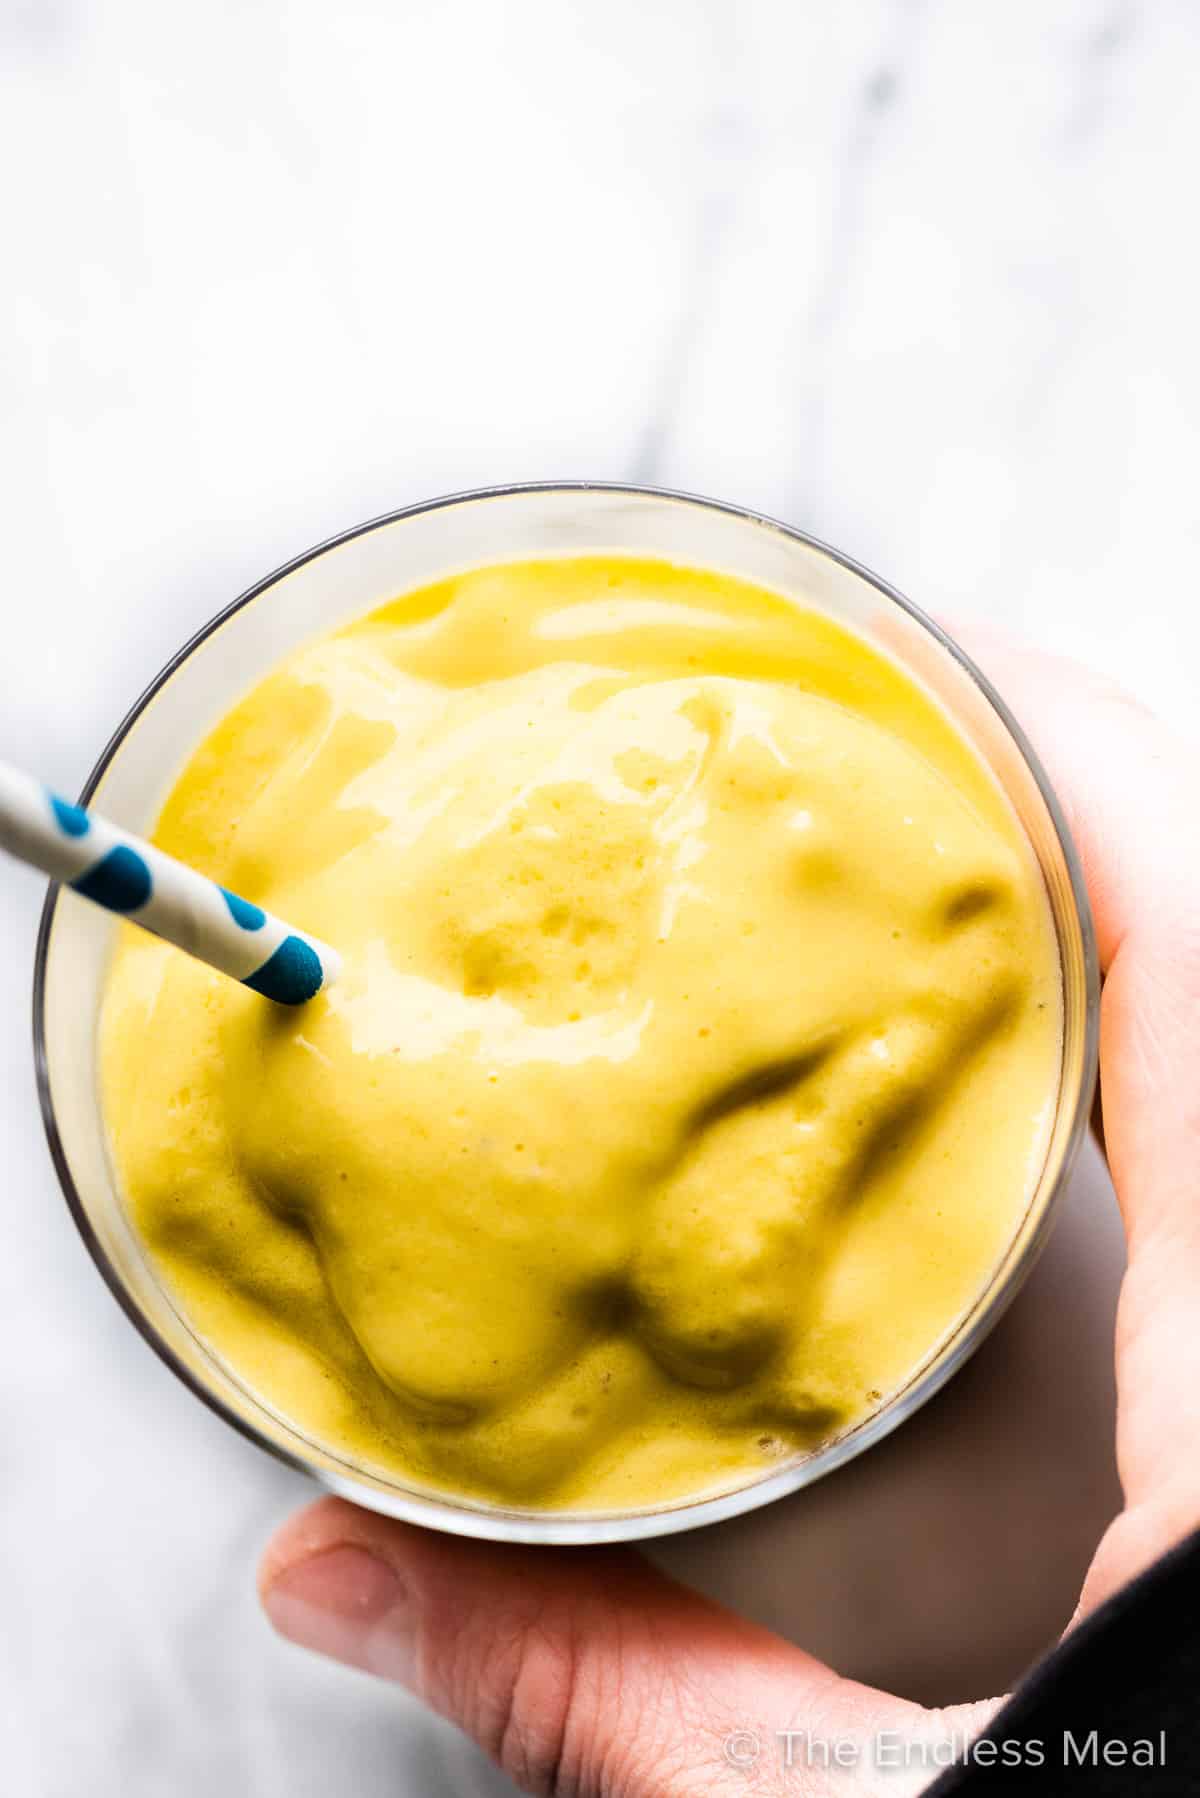 A hand holding a yellow smoothie.